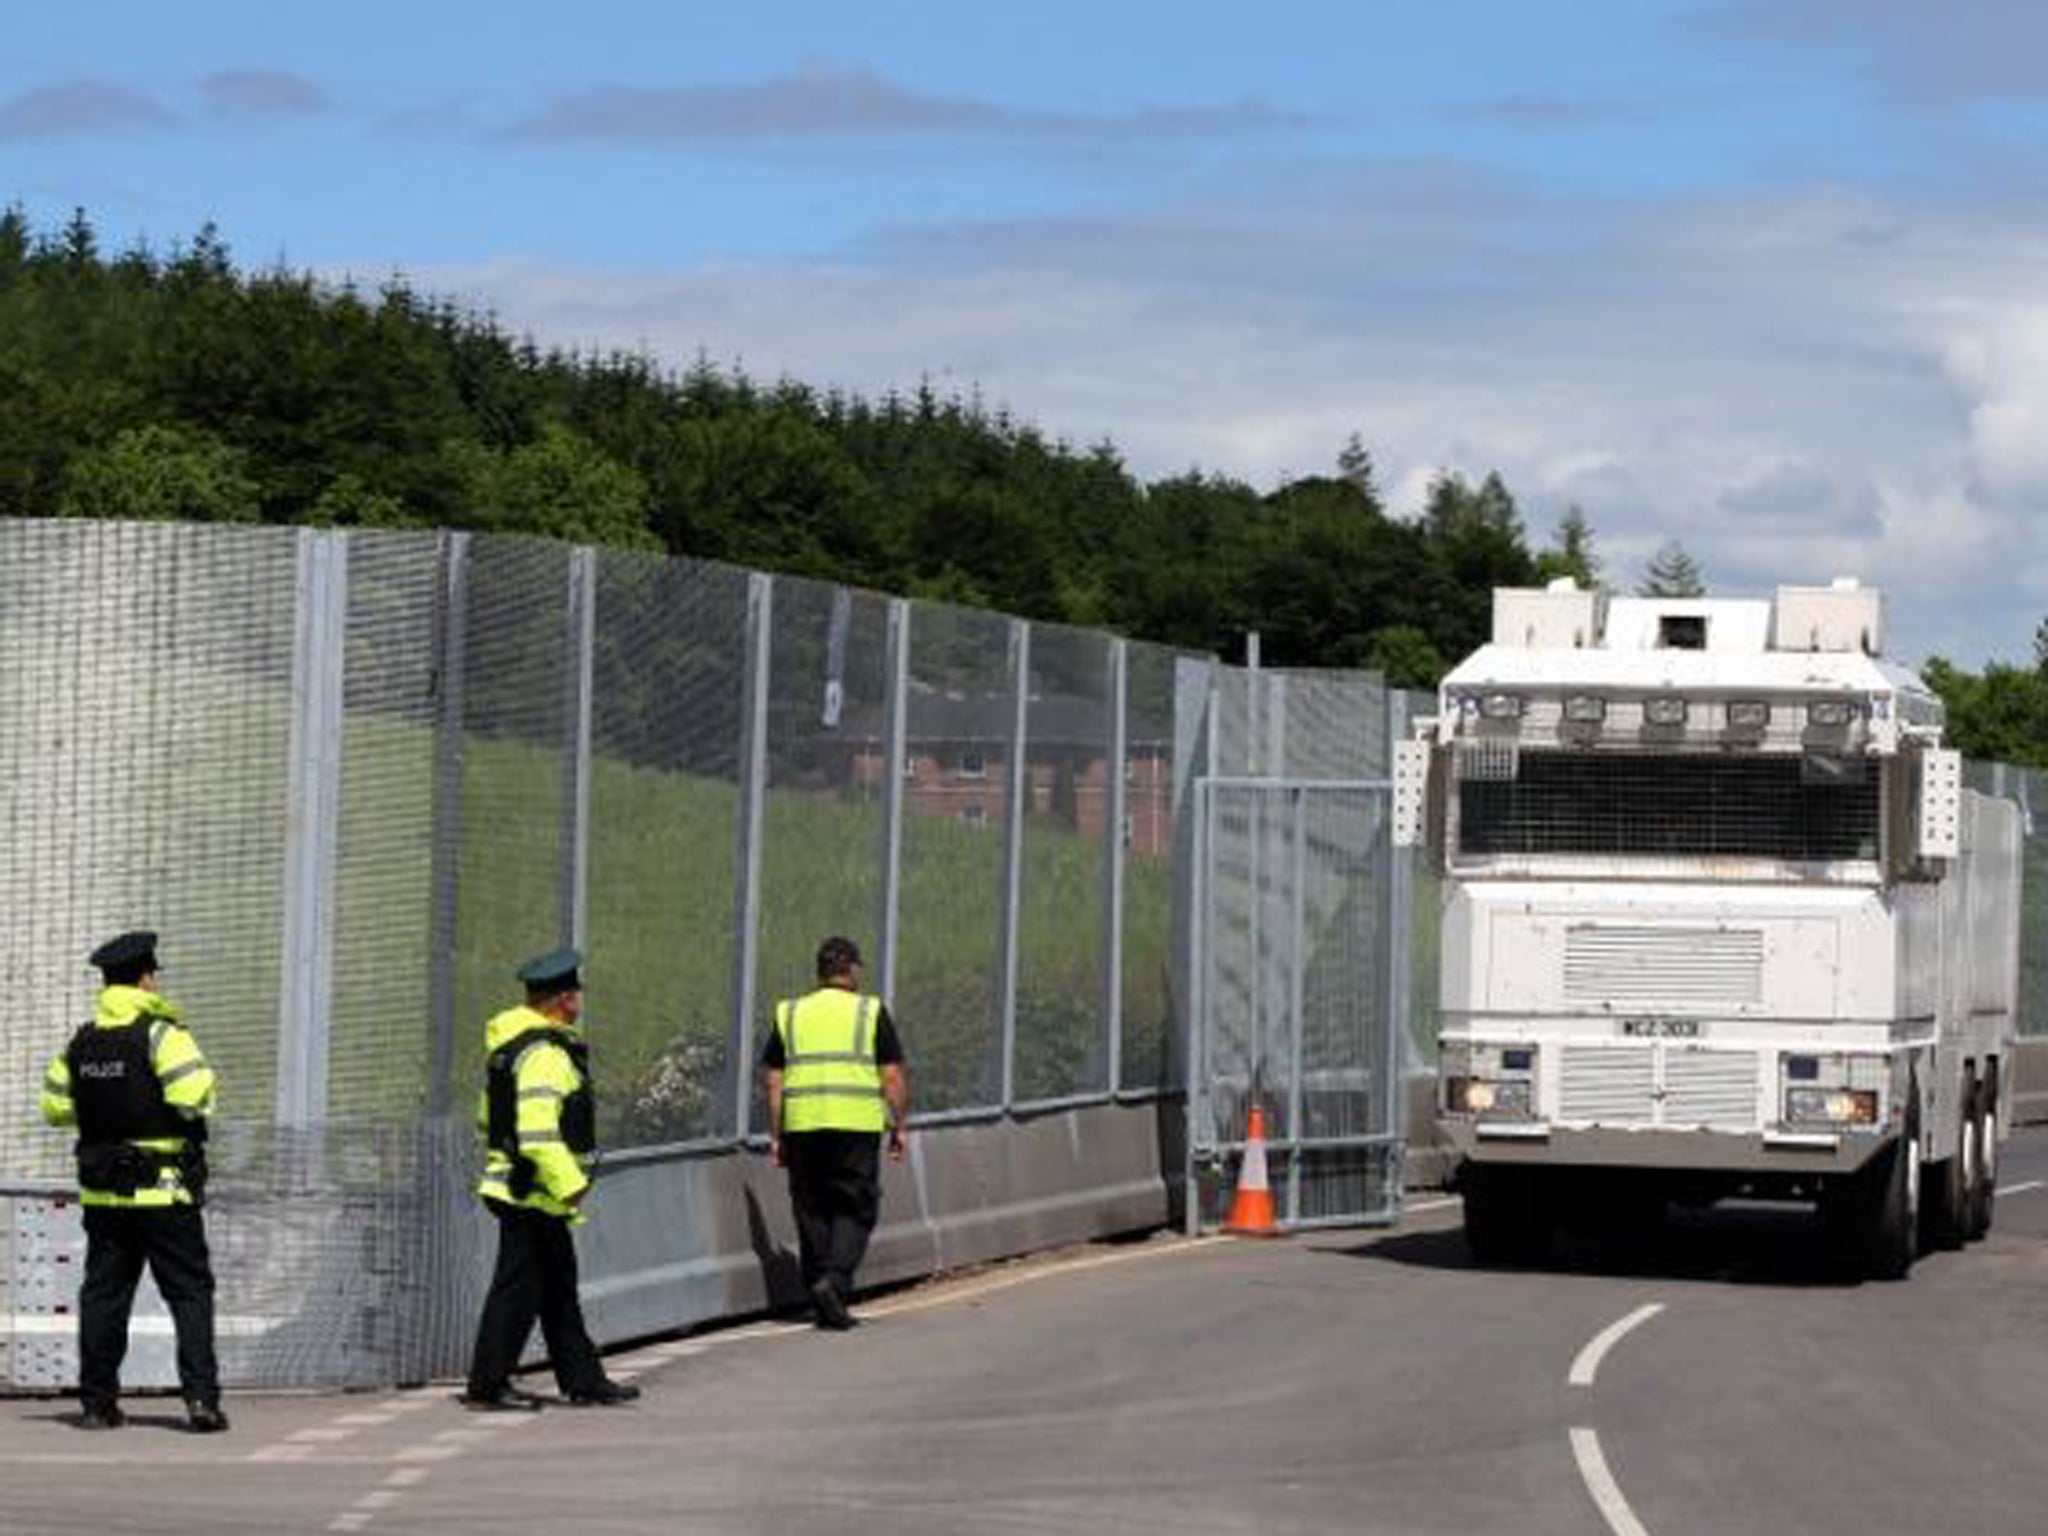 A Water cannon at the main checkpoint and security fence near Lough Erne Hotel resort in Co Fermanagh